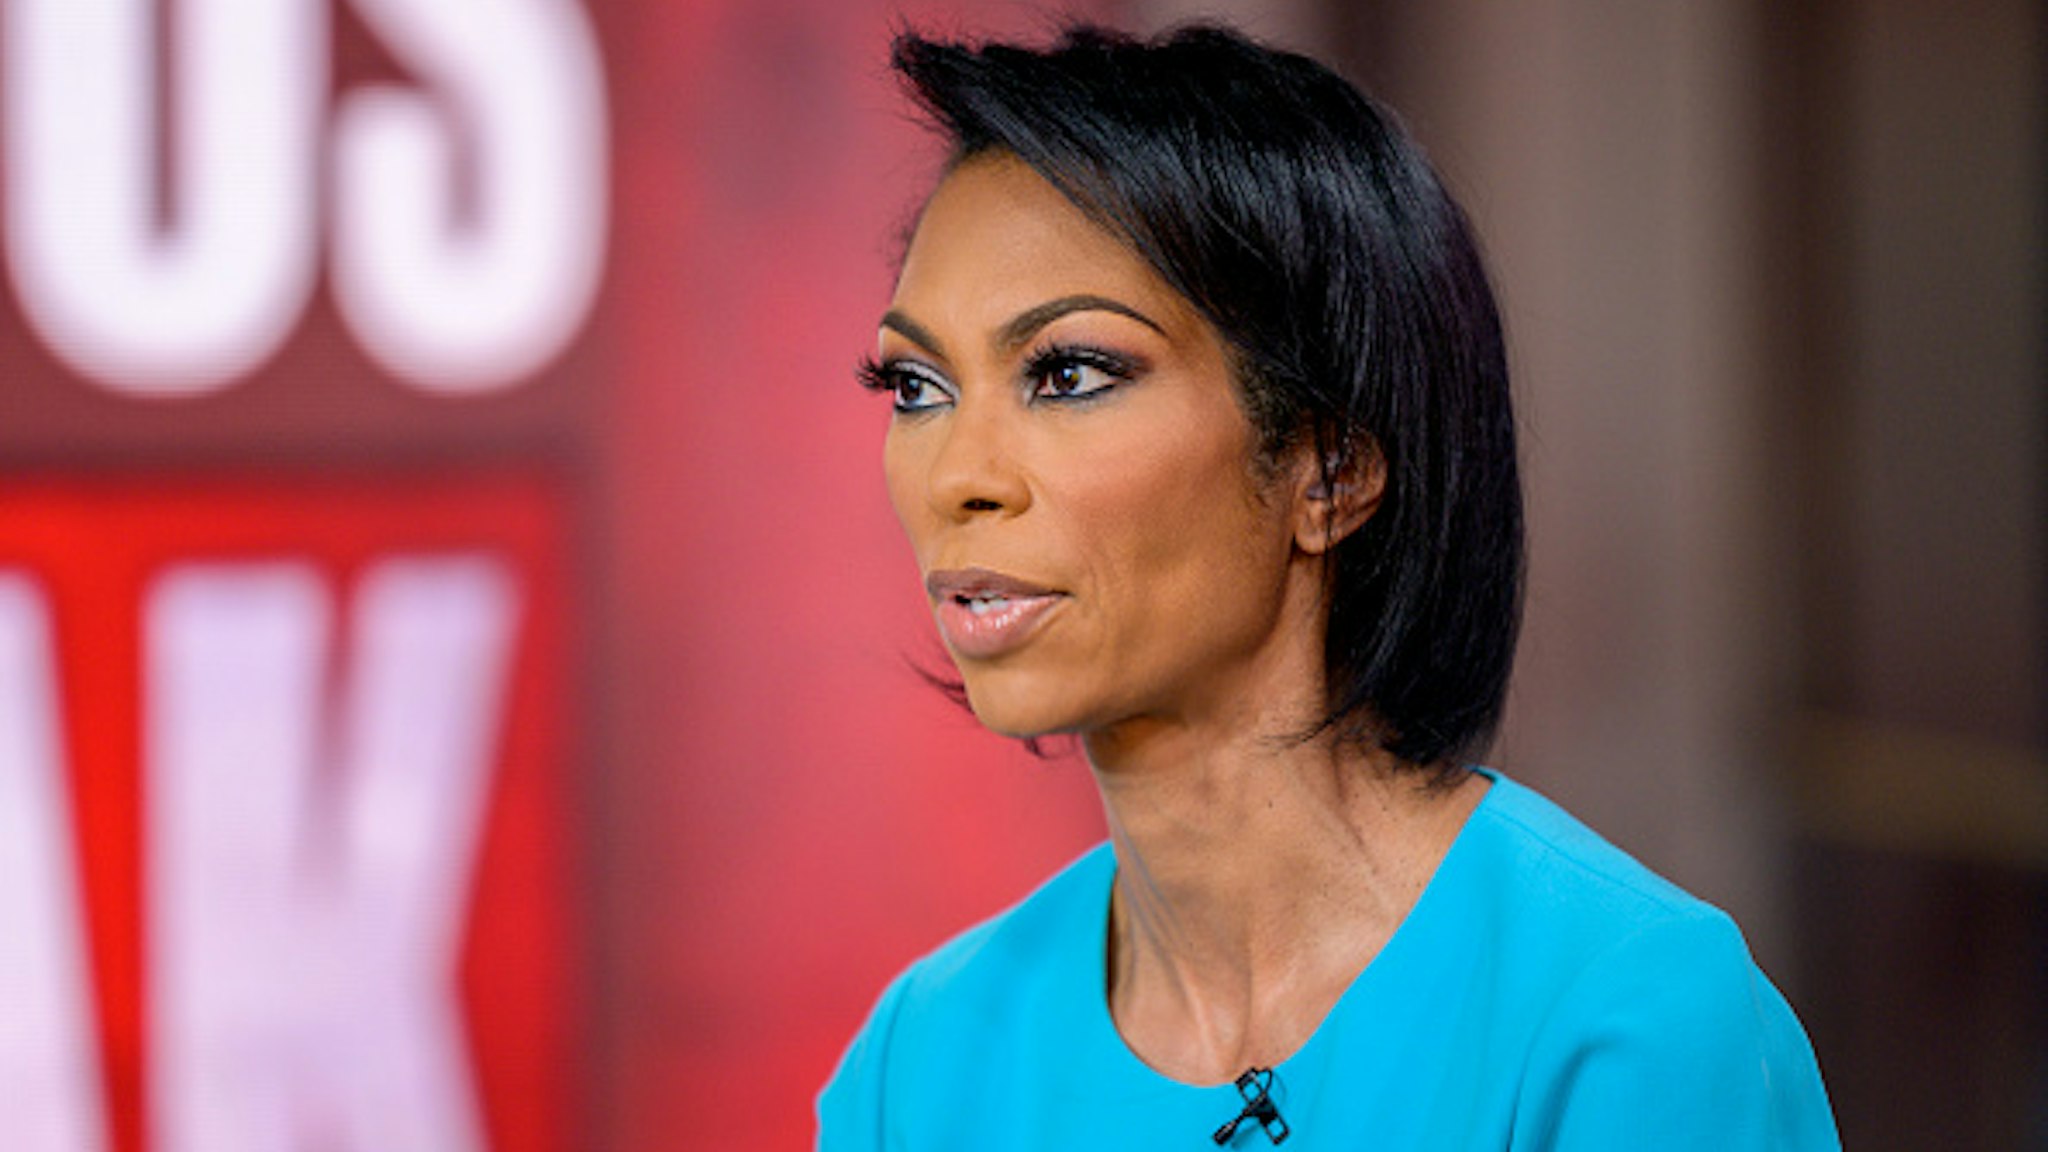 NEW YORK, NEW YORK - MARCH 09: Harris Faulkner as Dr. Oz visits "Outnumbered Overtime" at Fox News Channel Studios on March 09, 2020 in New York City.